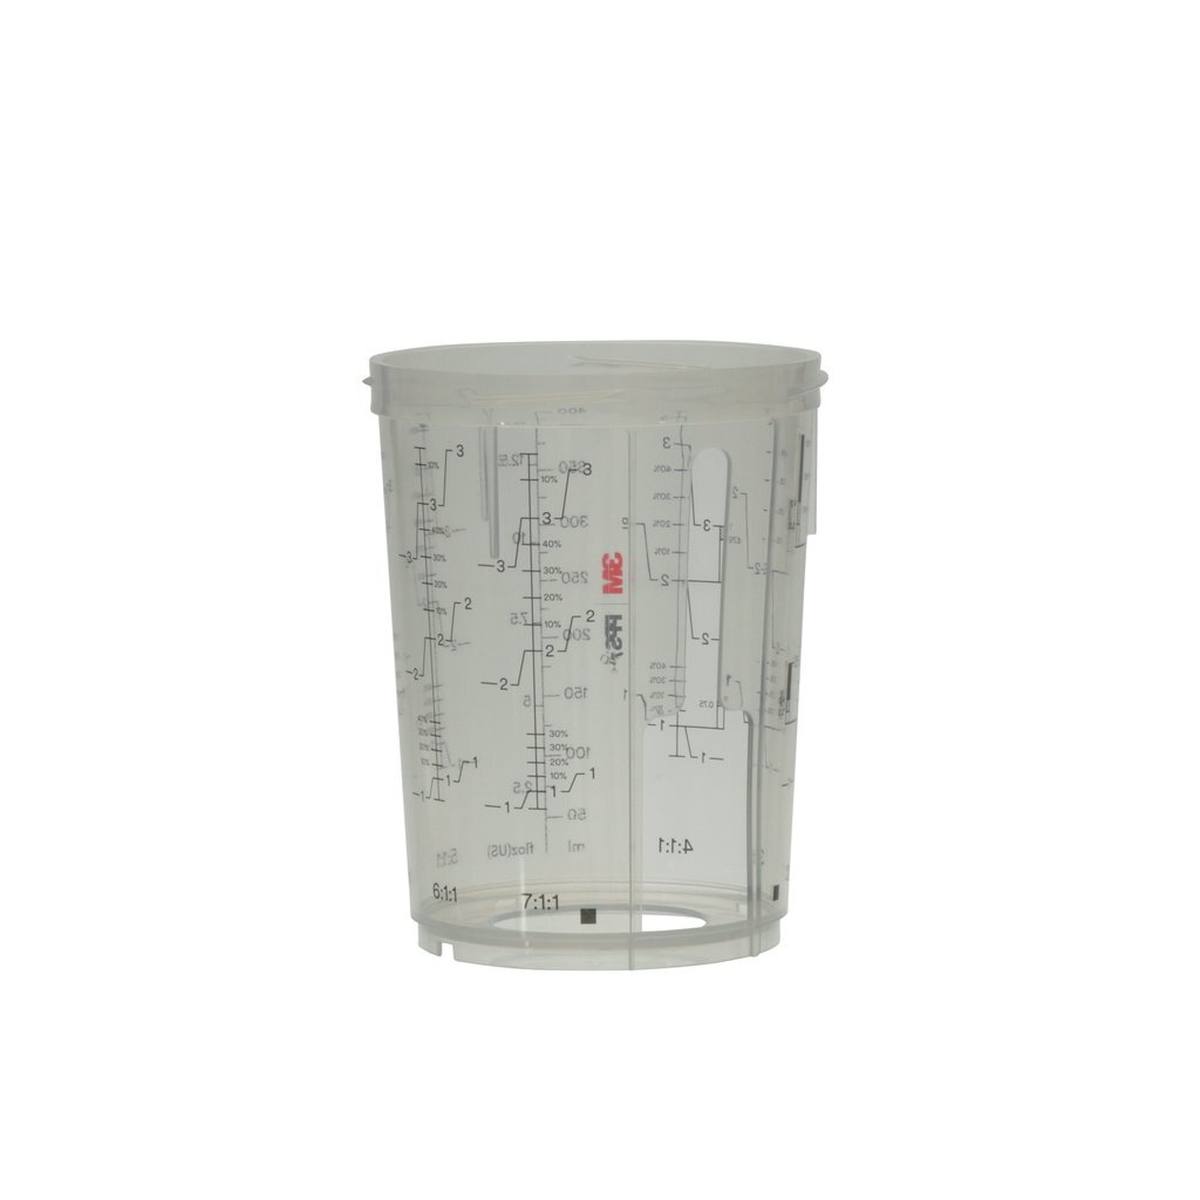 3M PPS Taza Serie 2.0, mediana, aprox. 400 ml, (paquete=4 unidades) 26122